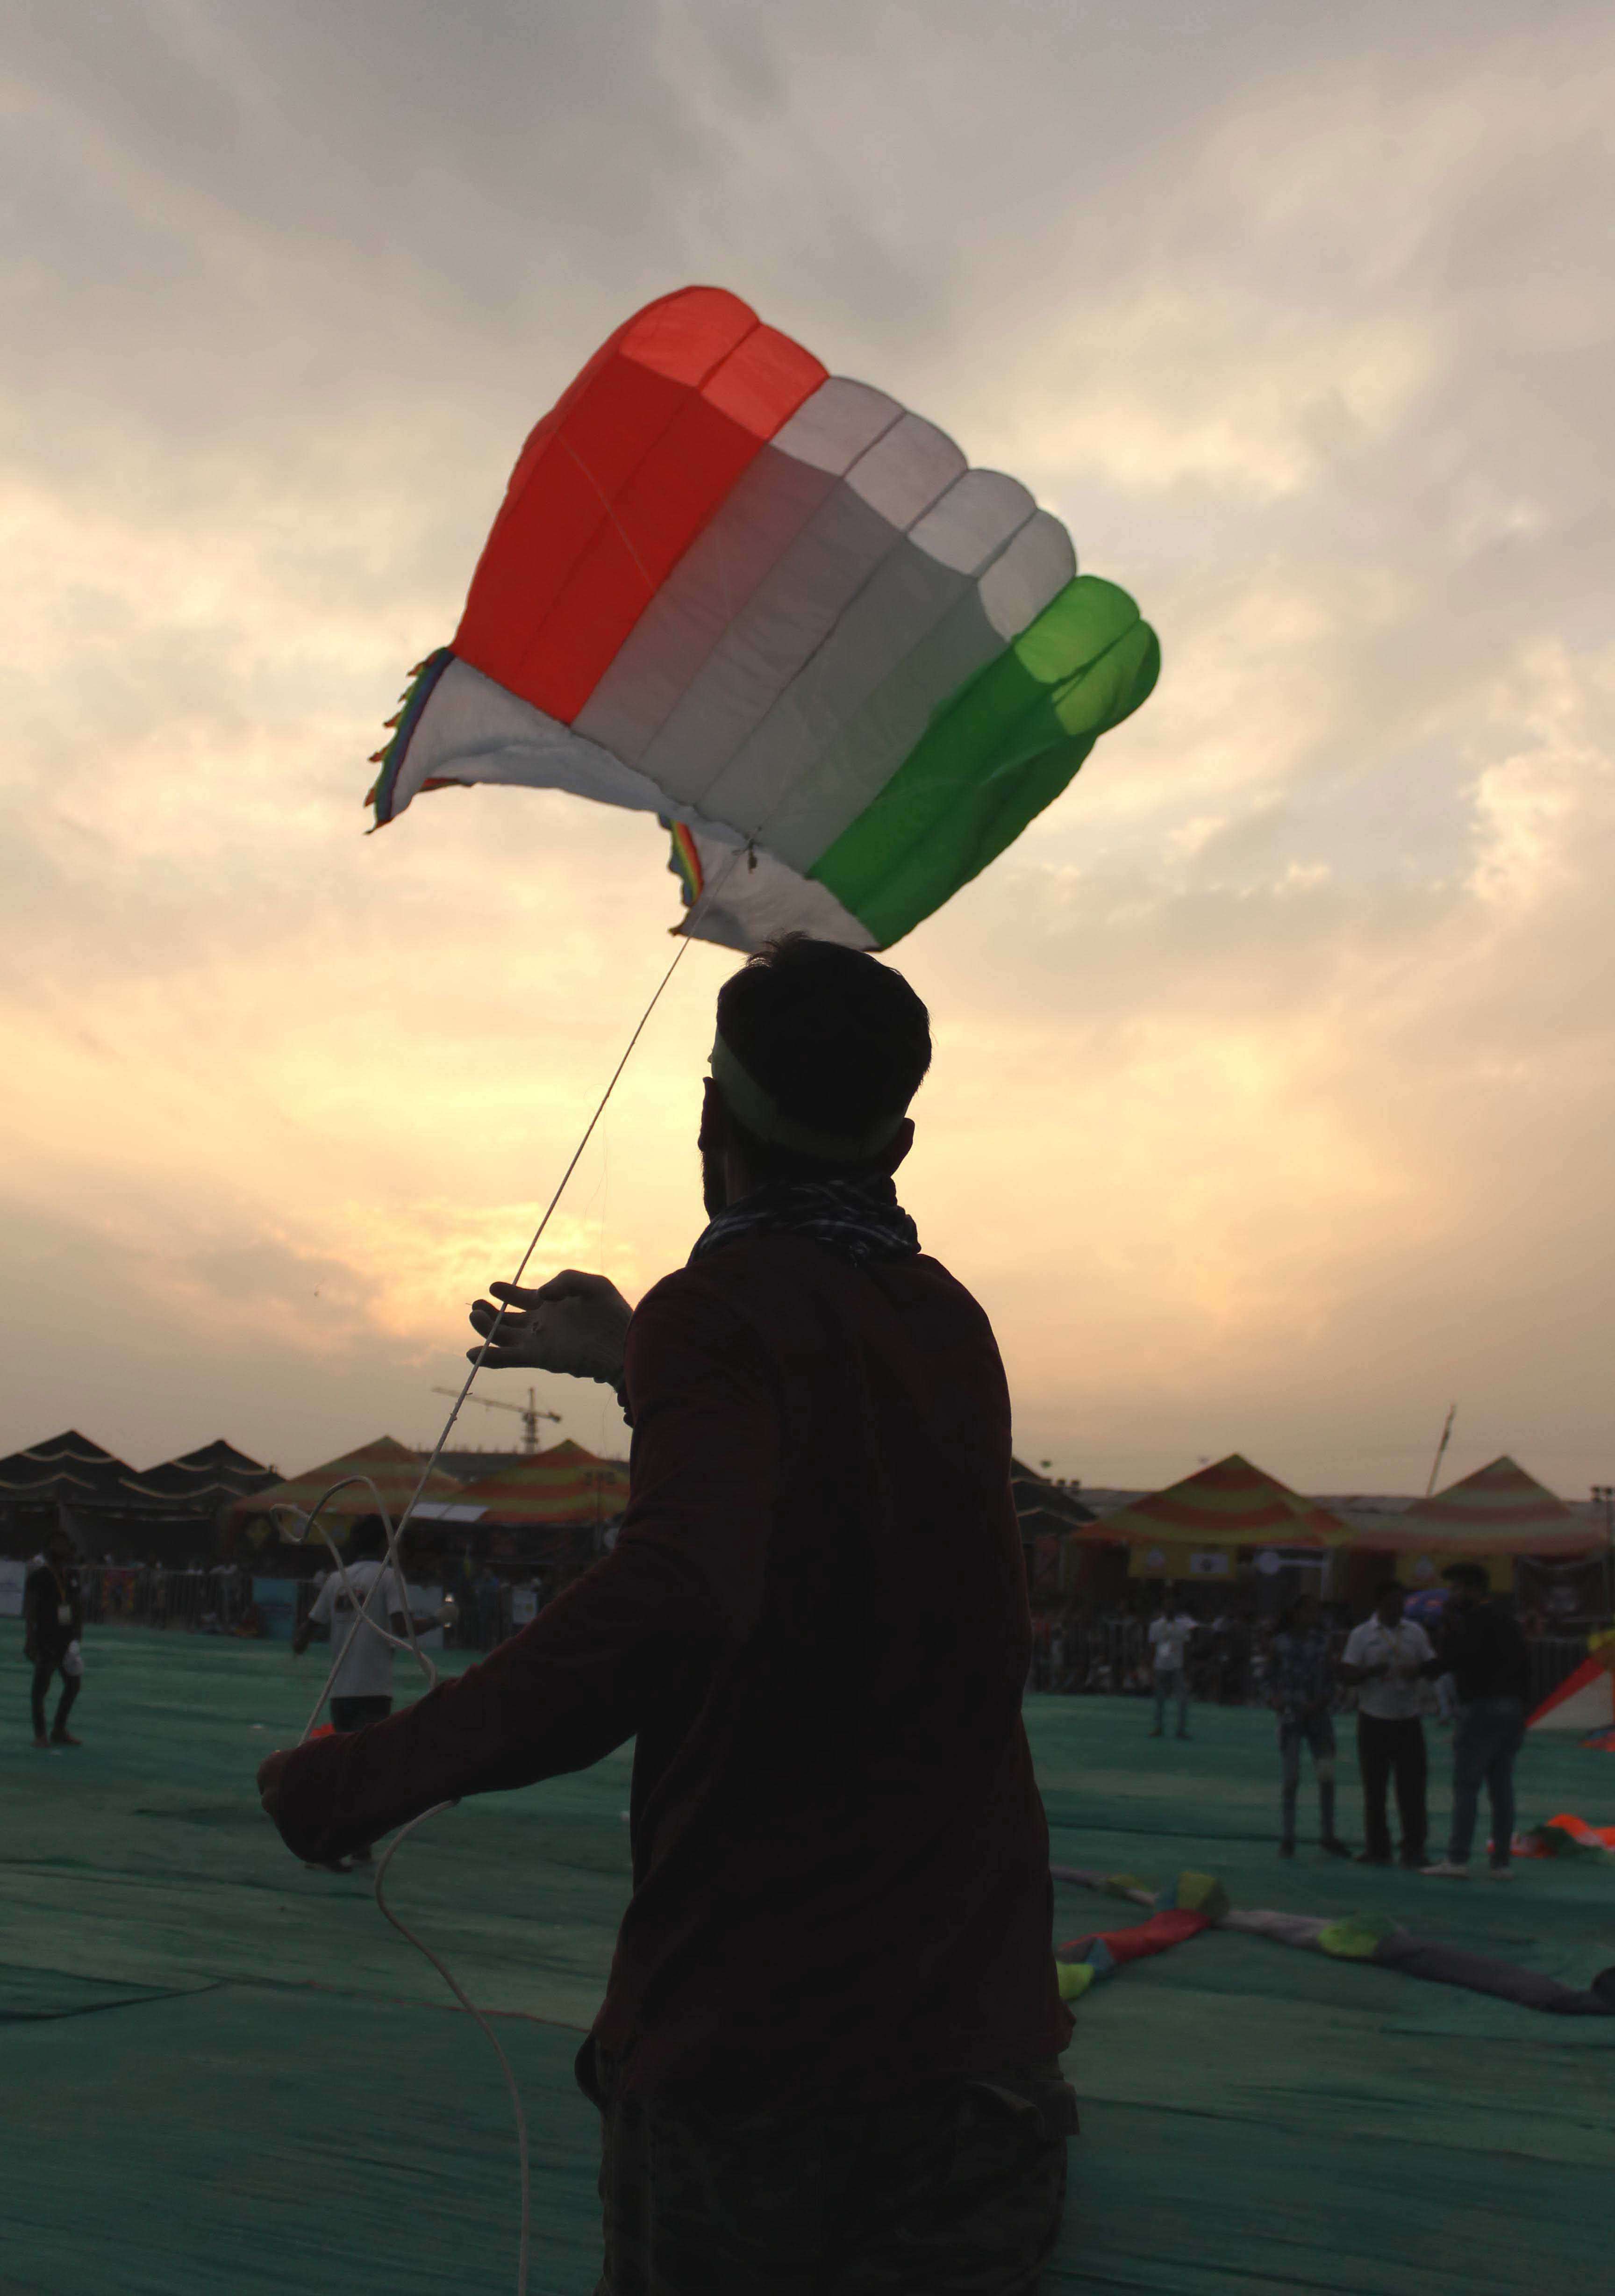 Tricolour Indore skies turn tricolour on Rday with kite flying